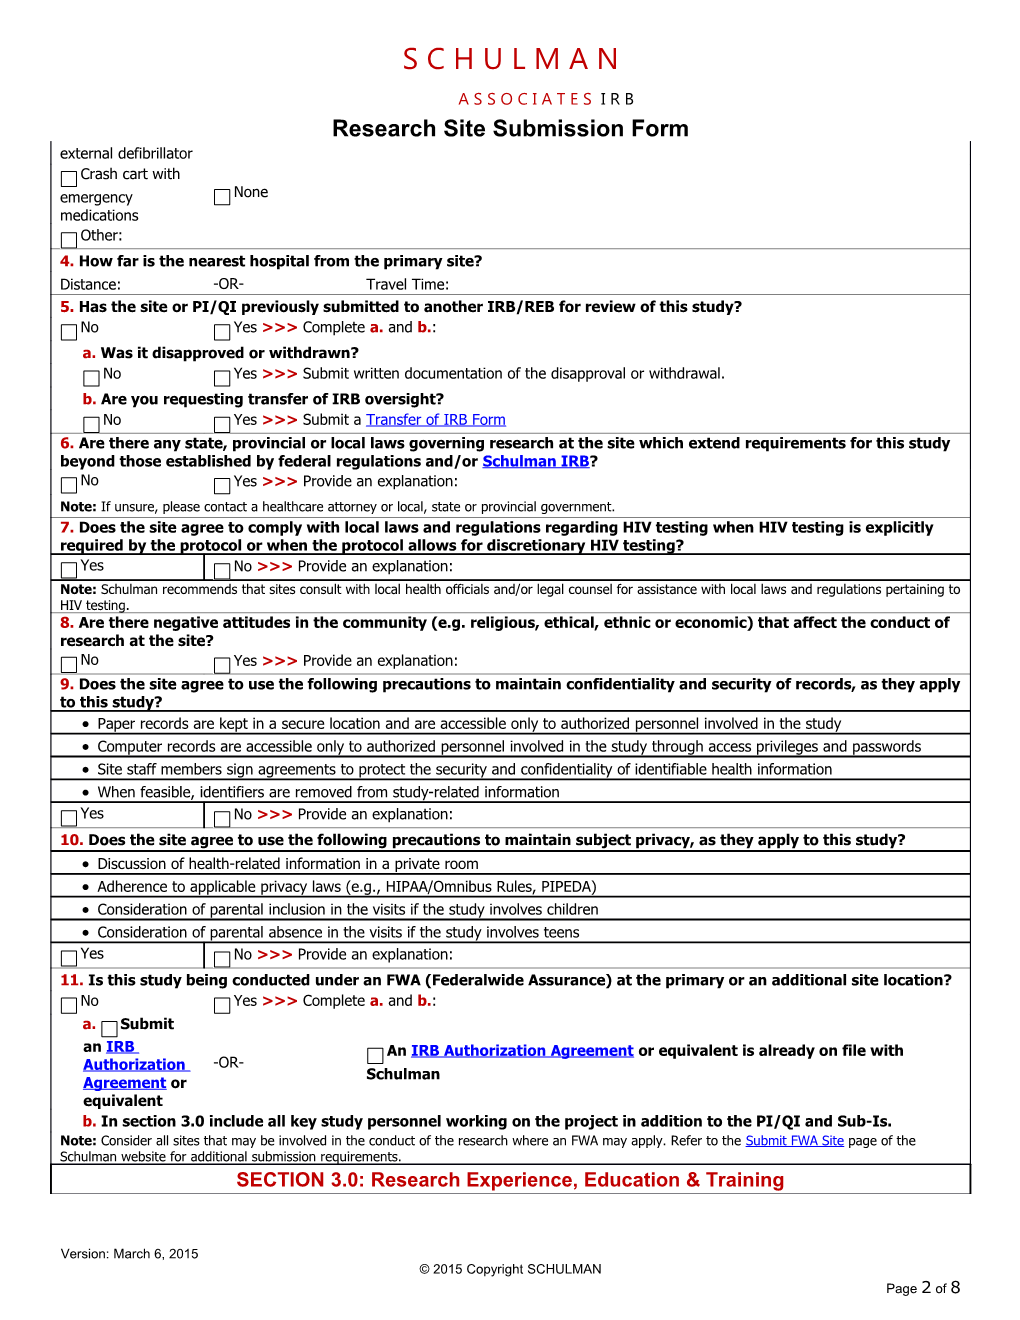 Research Site Submission Form s1